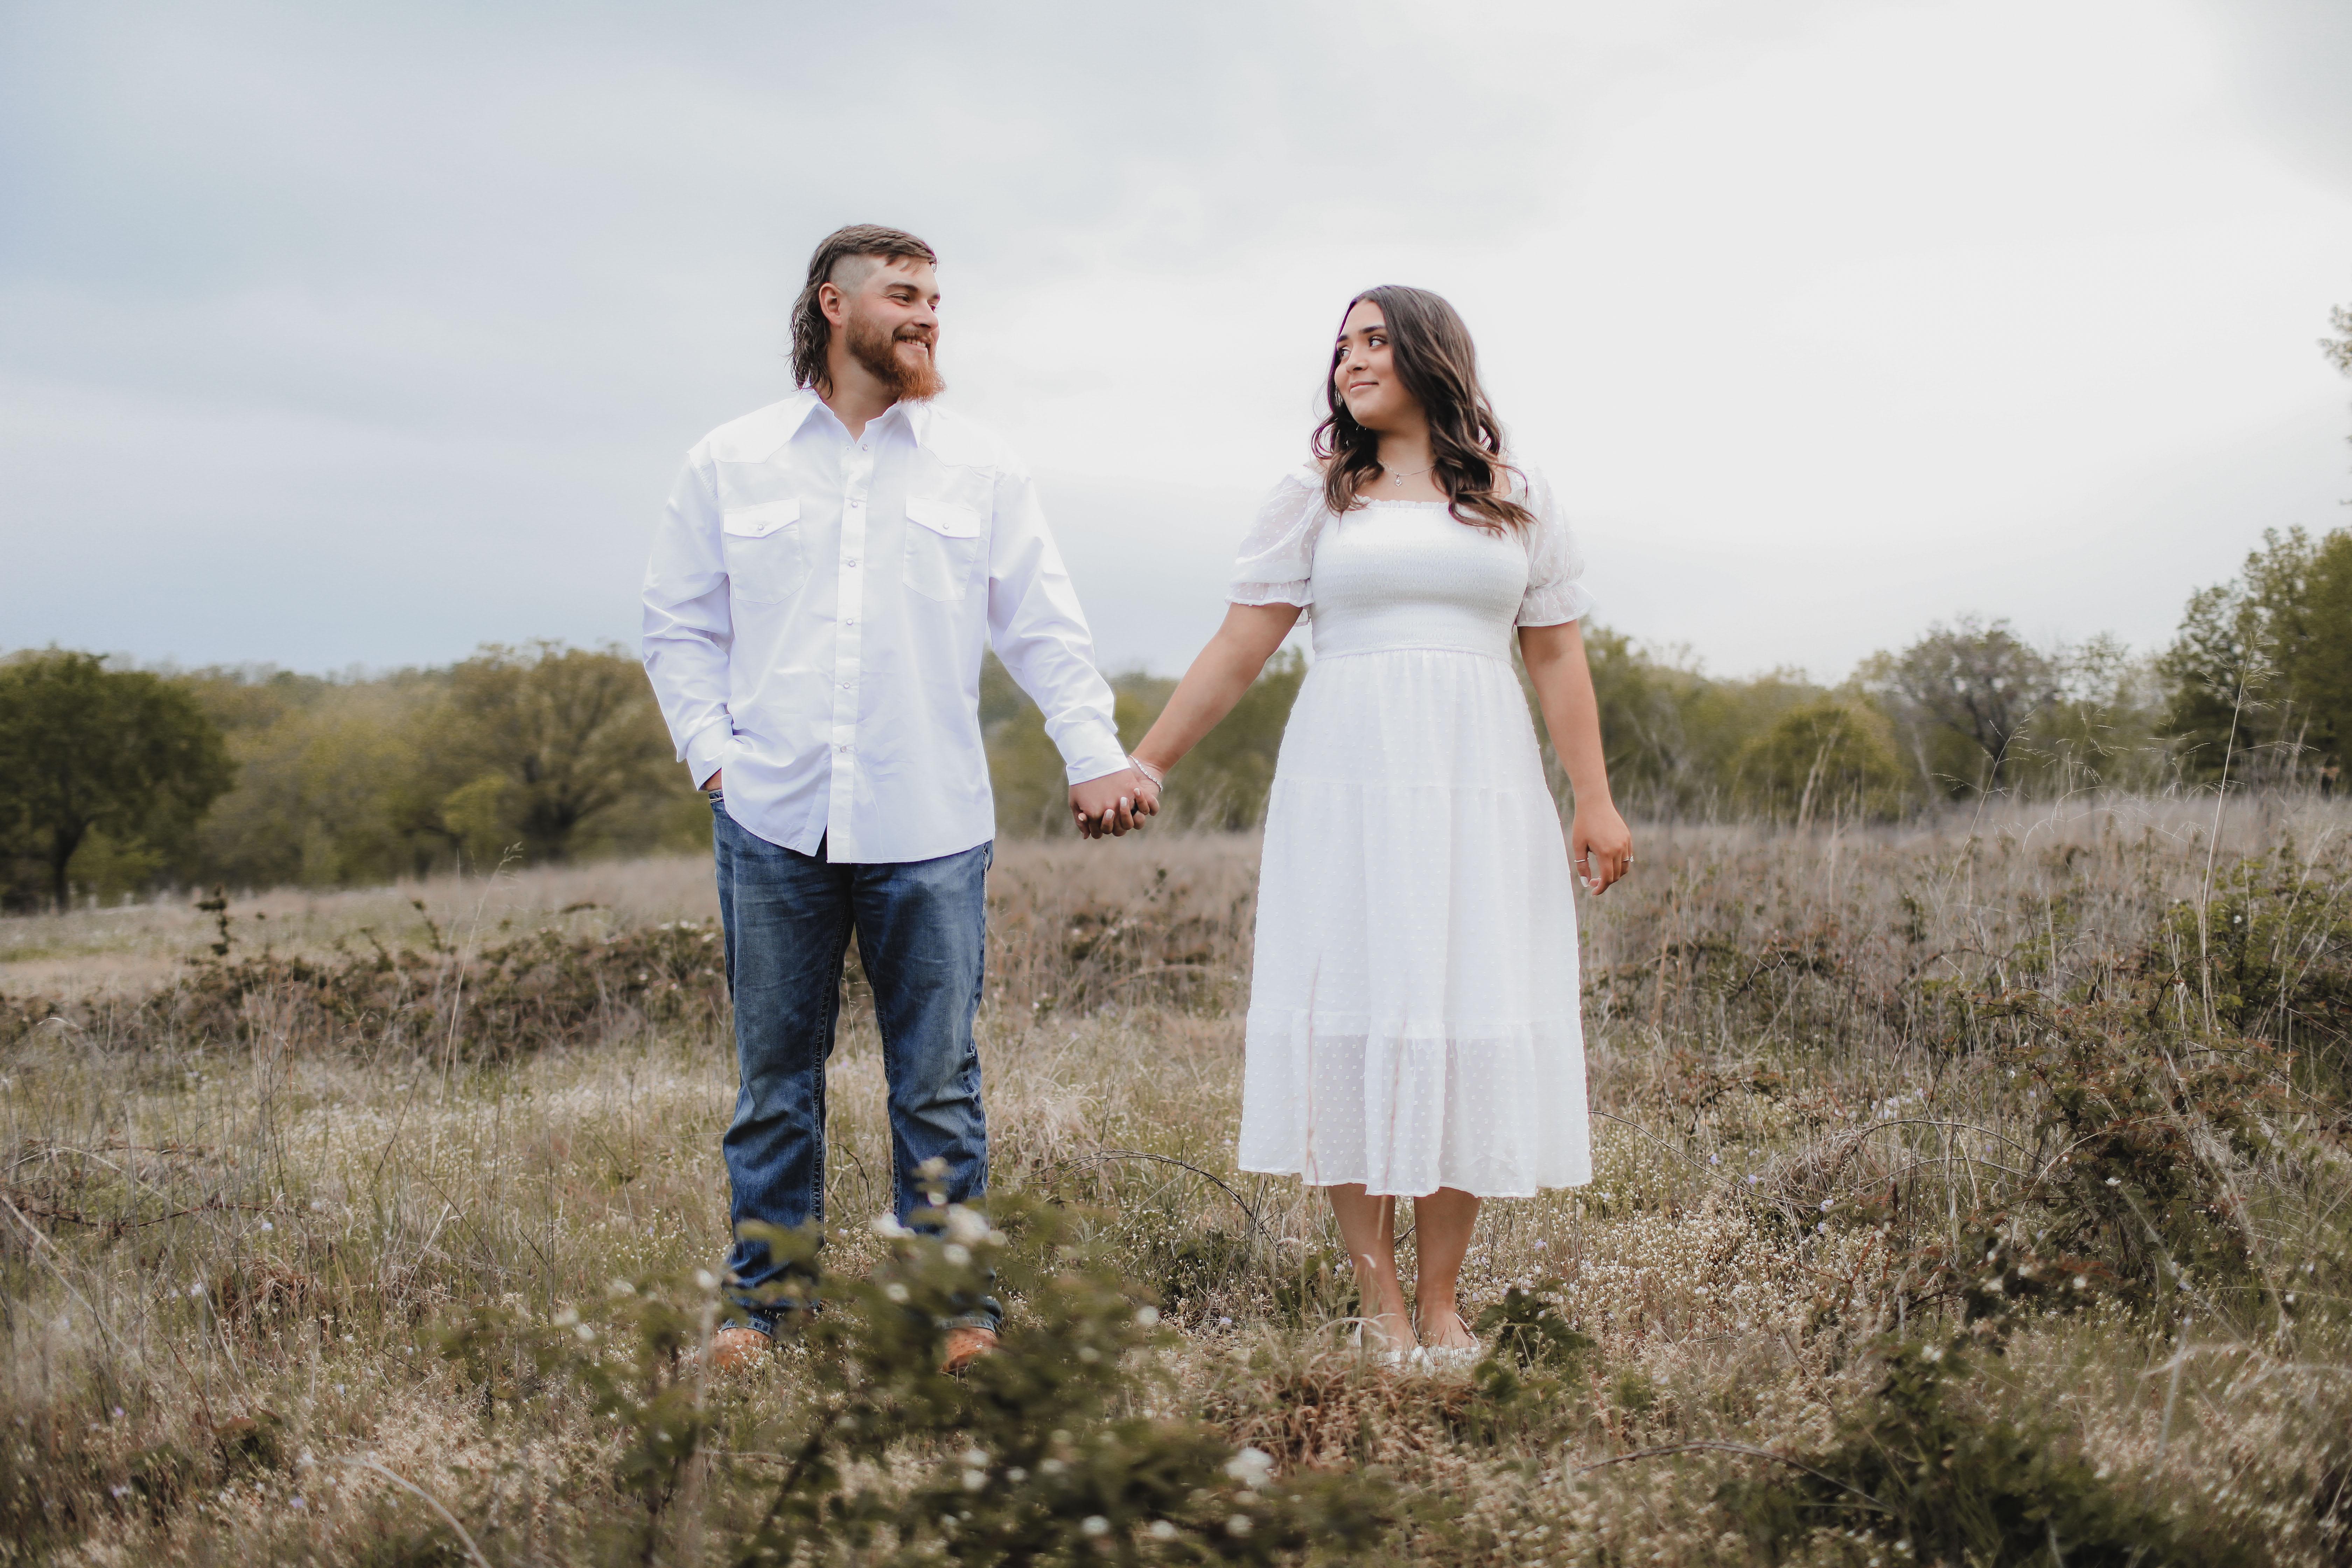 The Wedding Website of Emily Garcia and Jacob Flowers